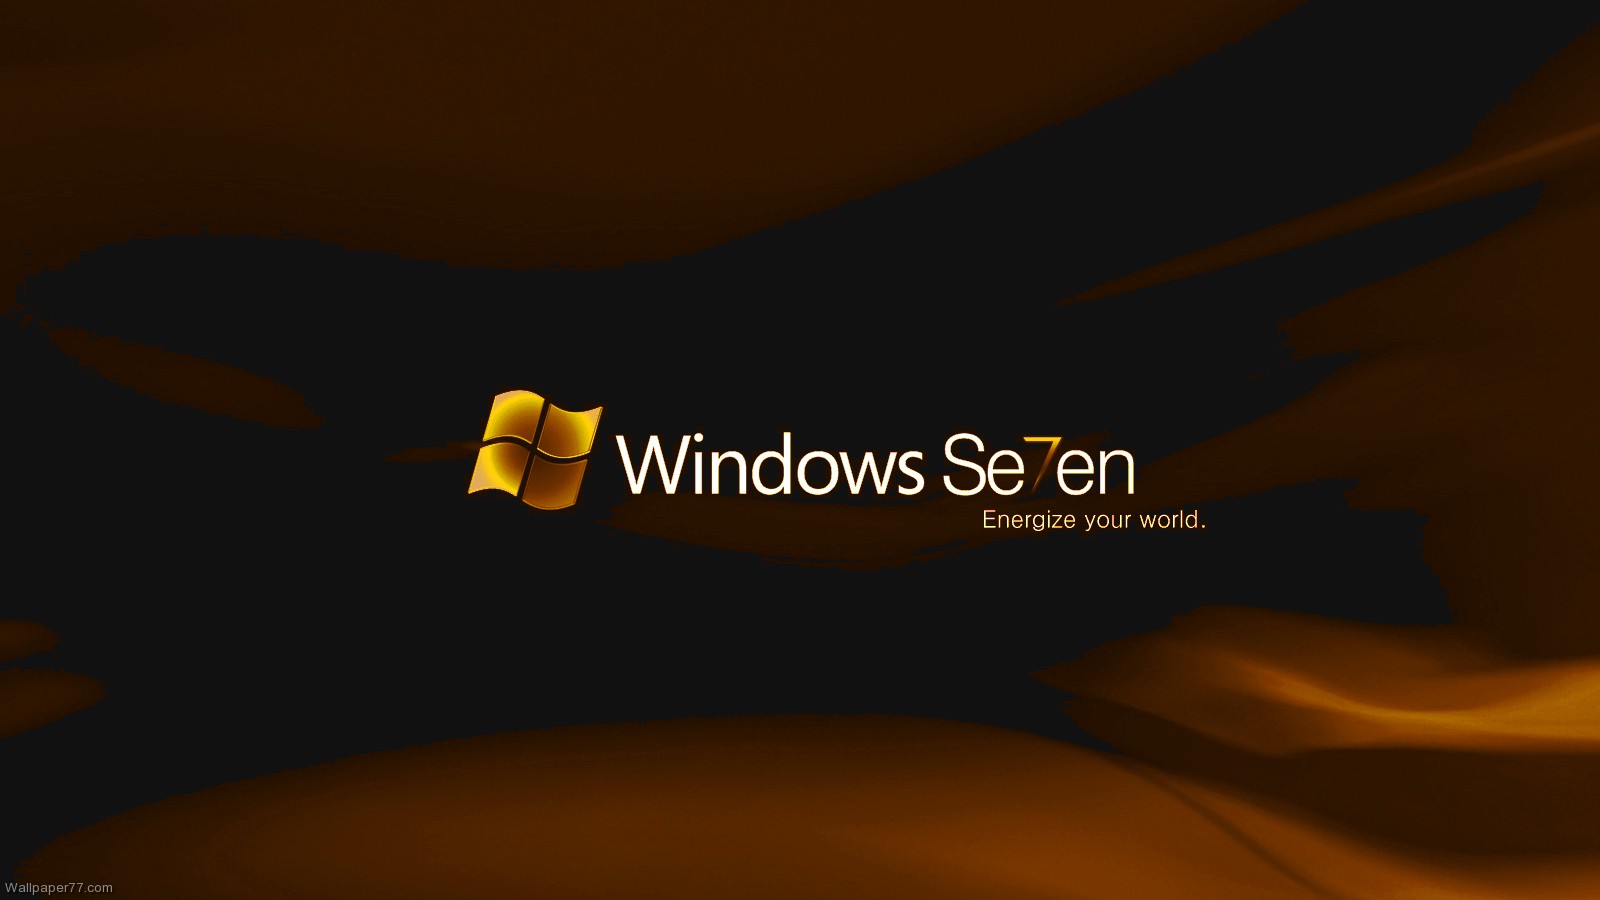 Windows 7 Energize Your World Red, 1600x900 pixels : Wallpapers ...